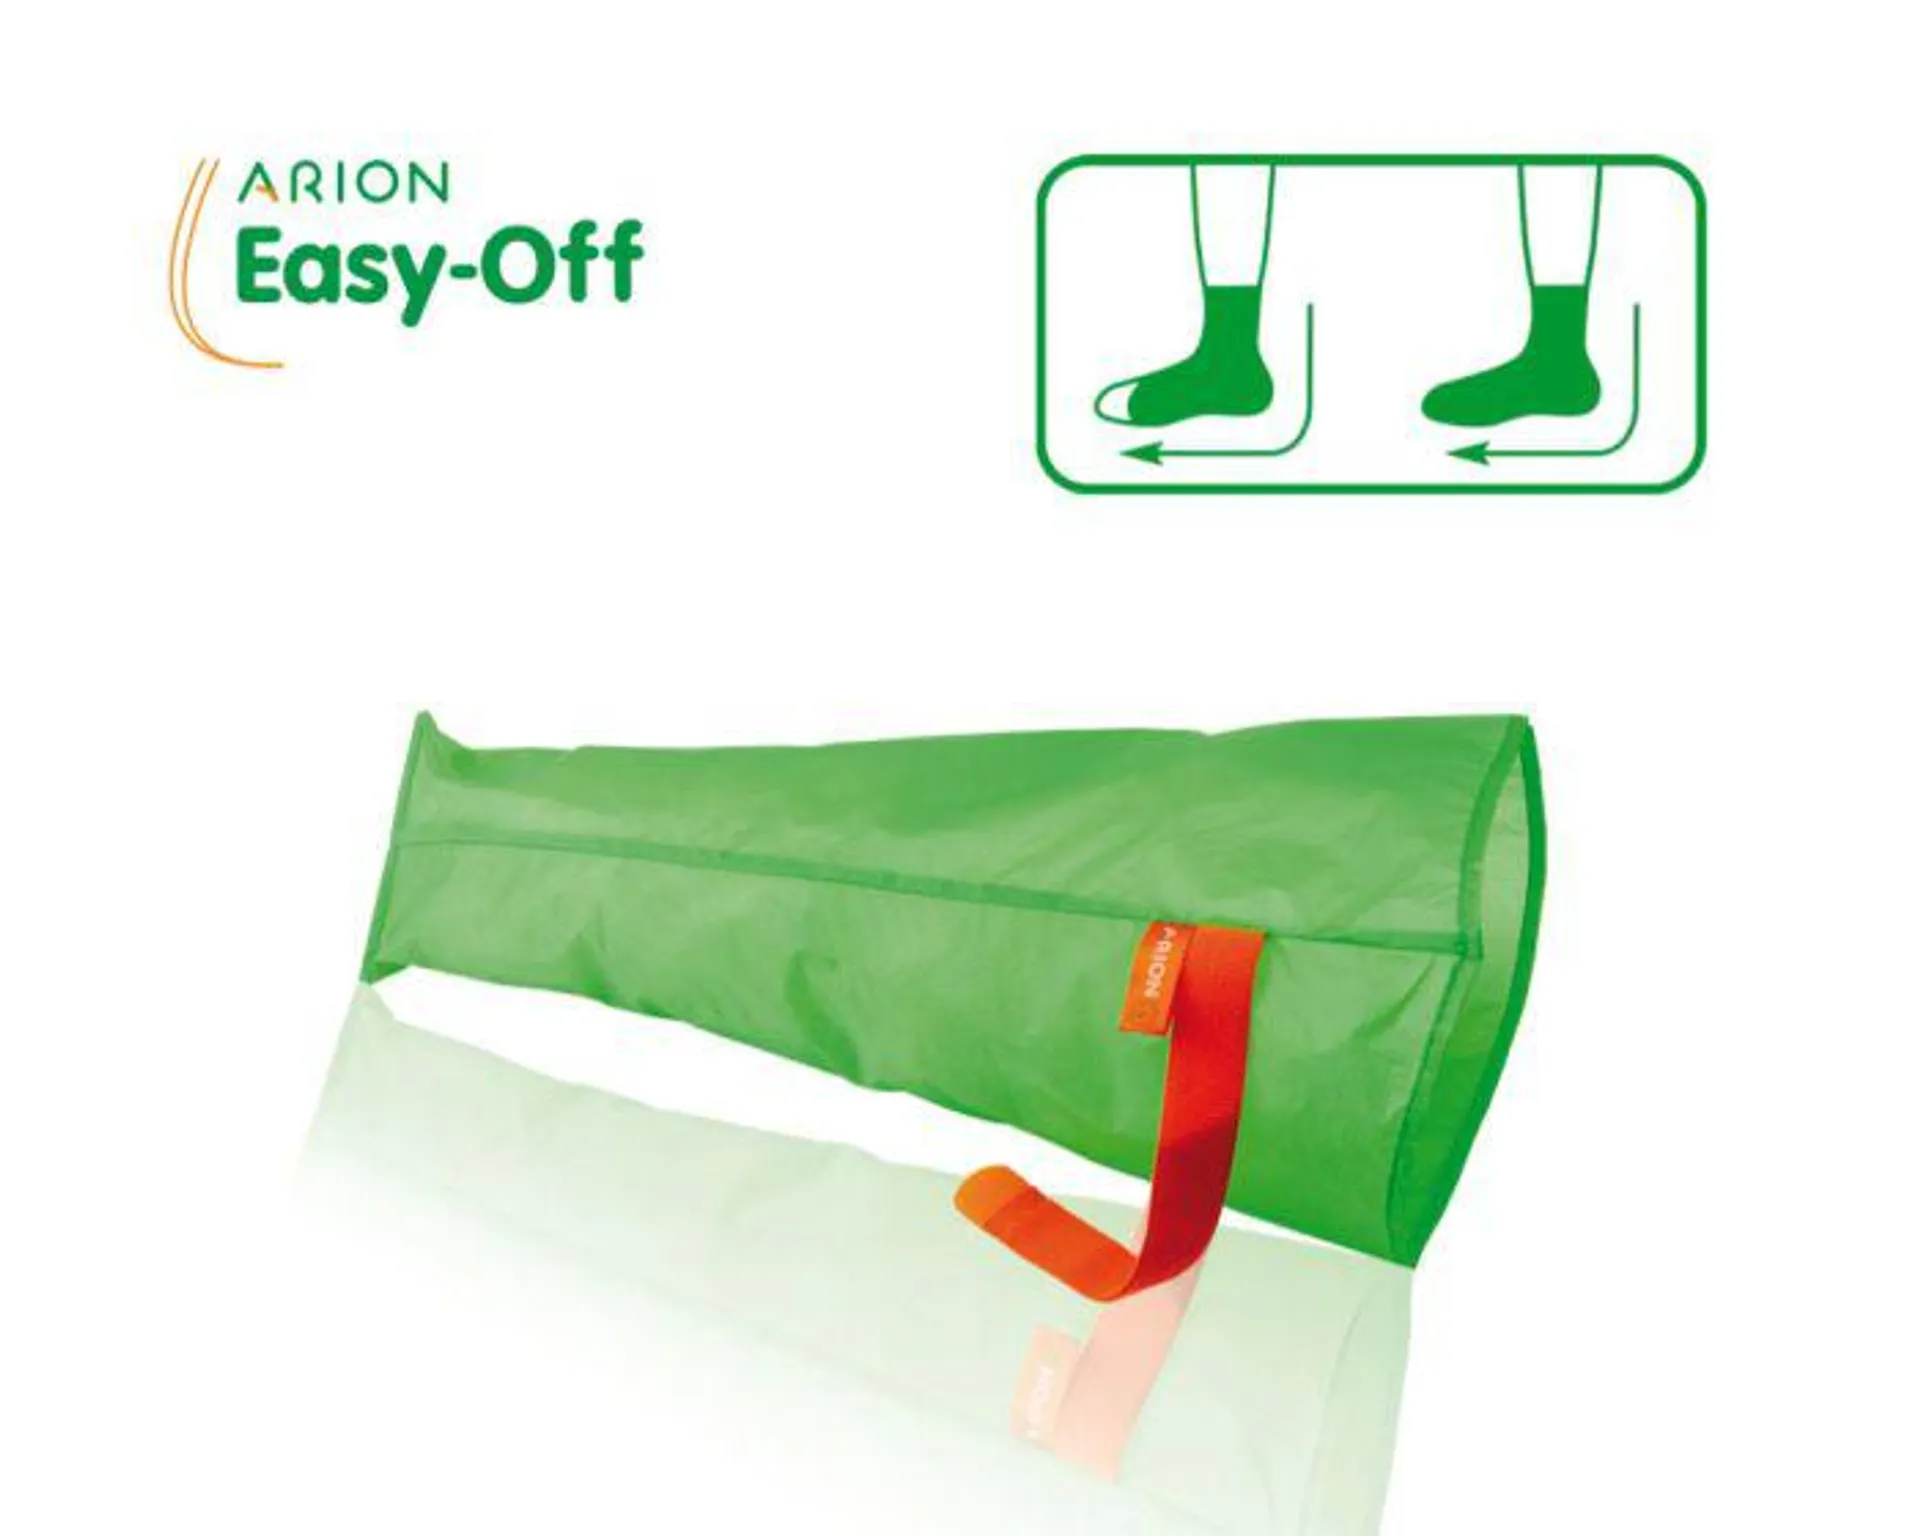 ARION Easy-Off